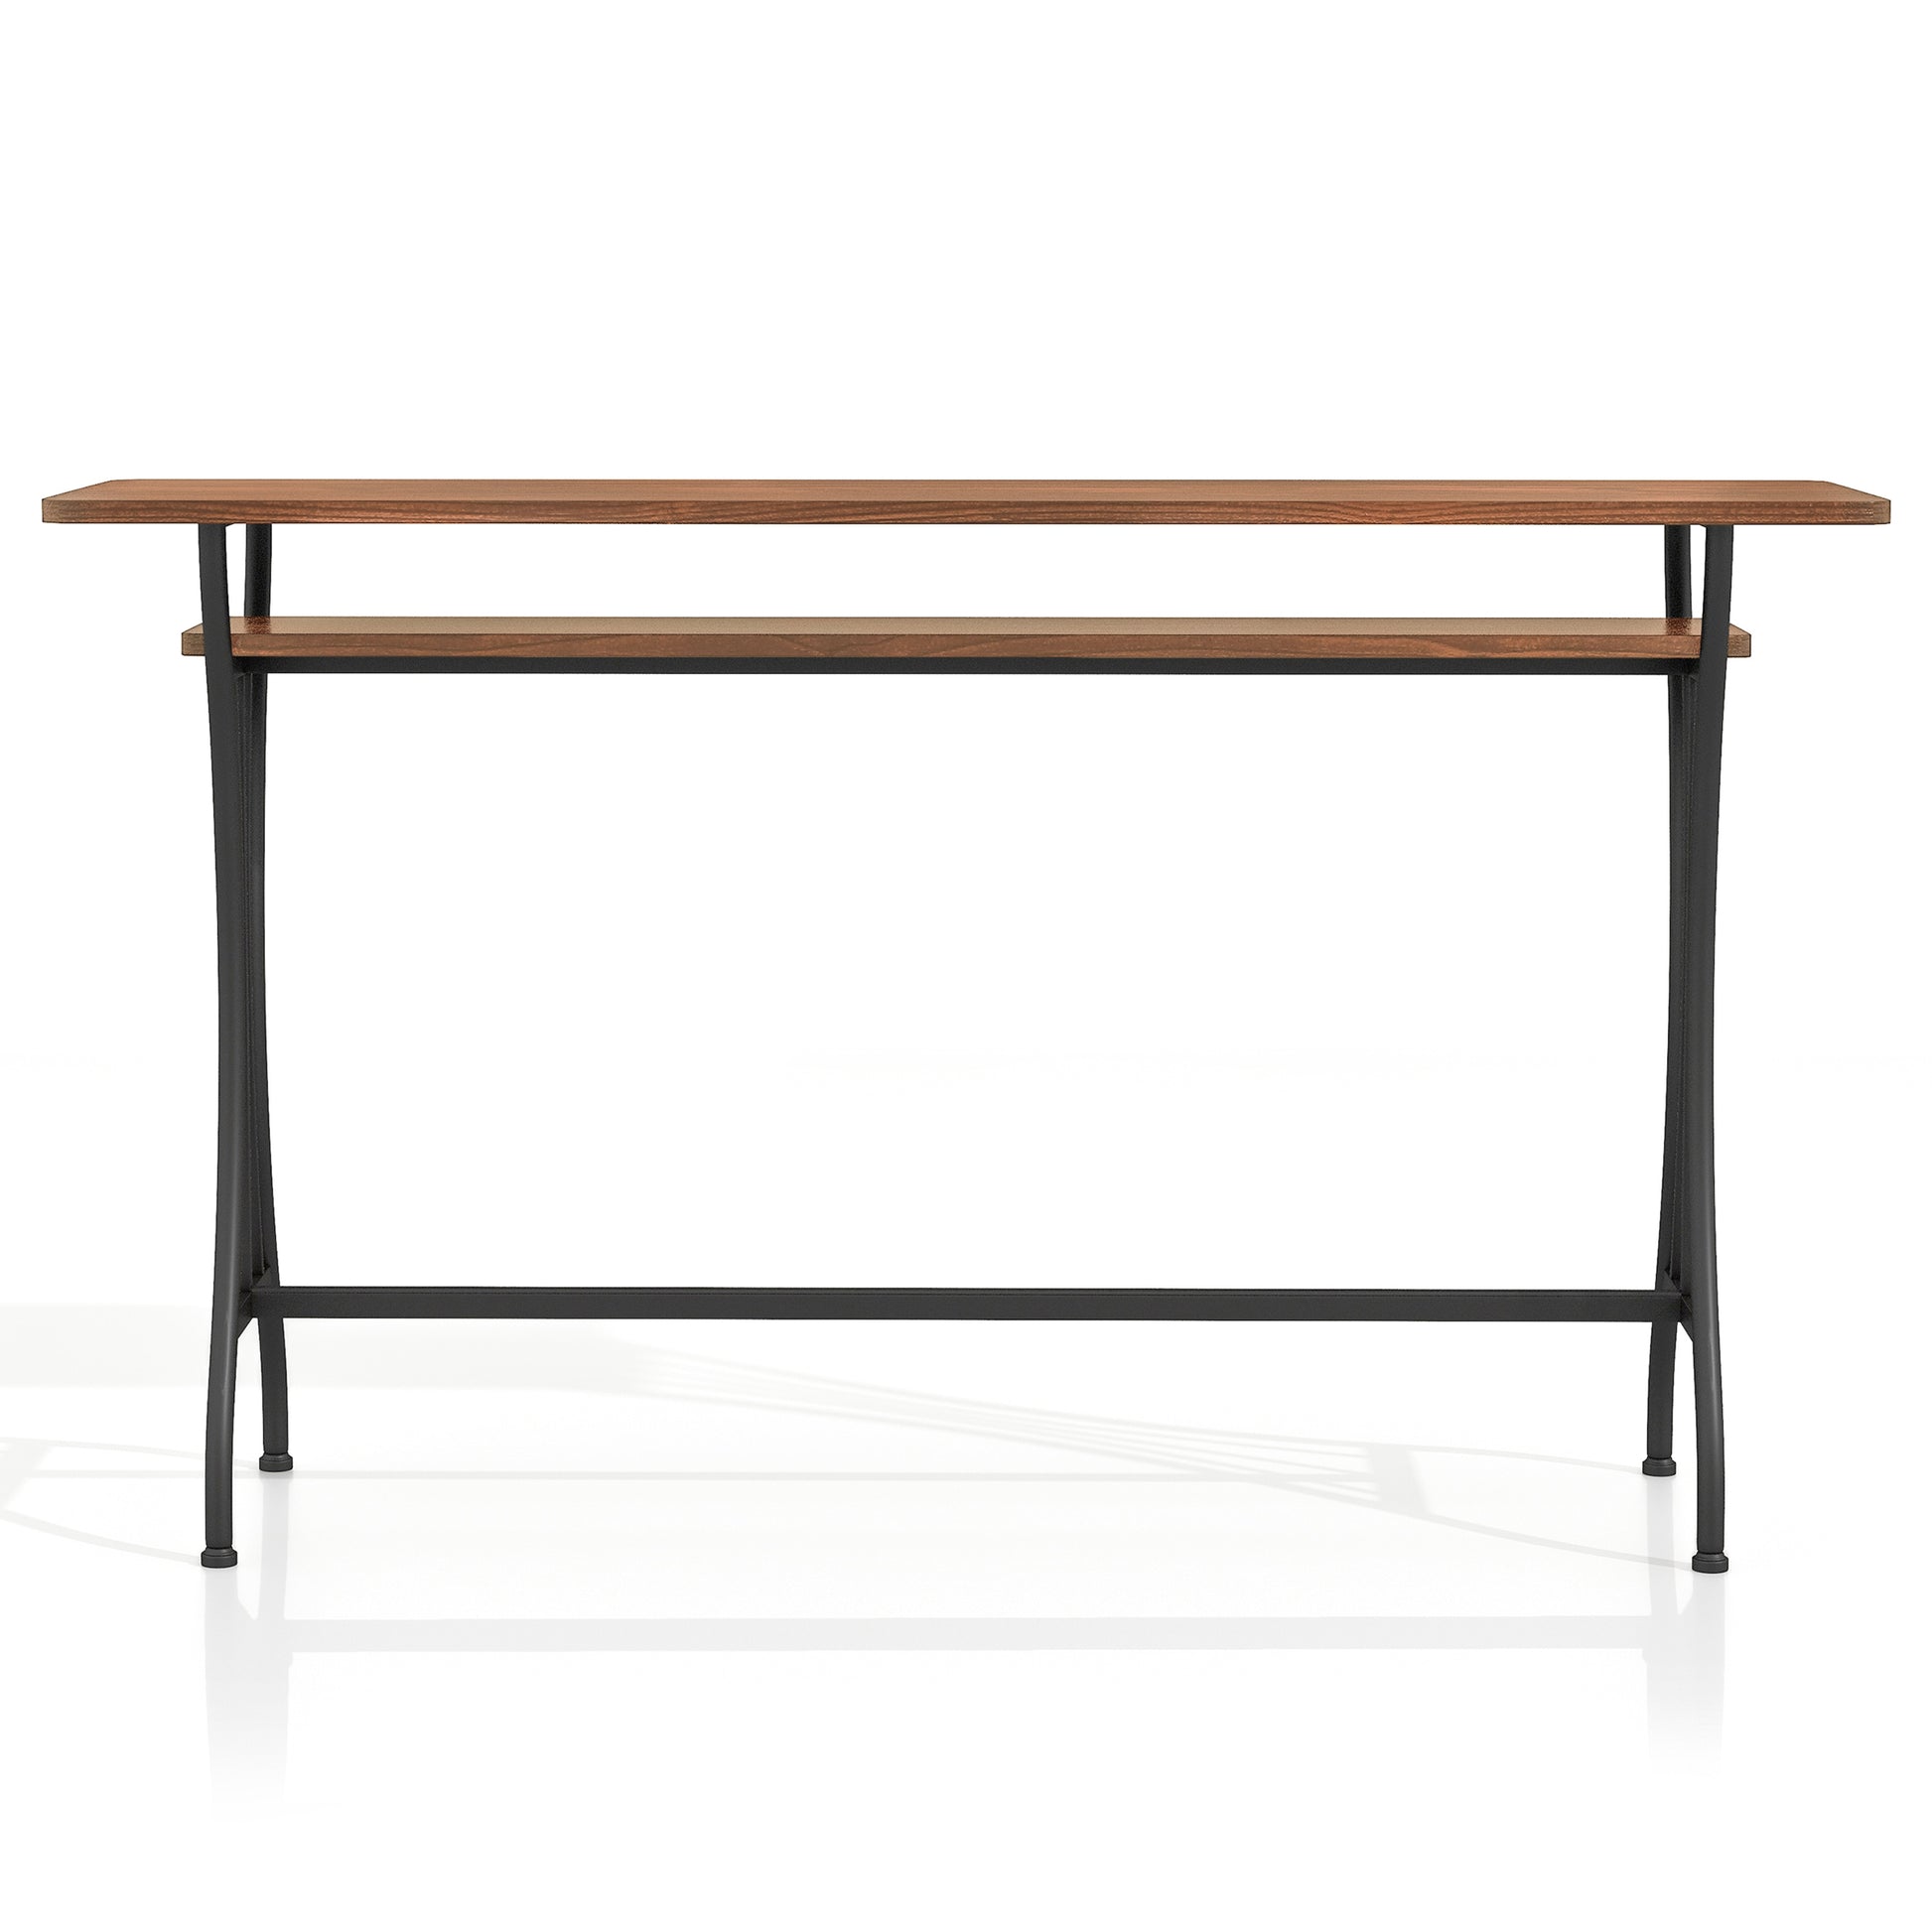 Front-facing modern industrial warm oak and black one-shelf counter height table on a white background